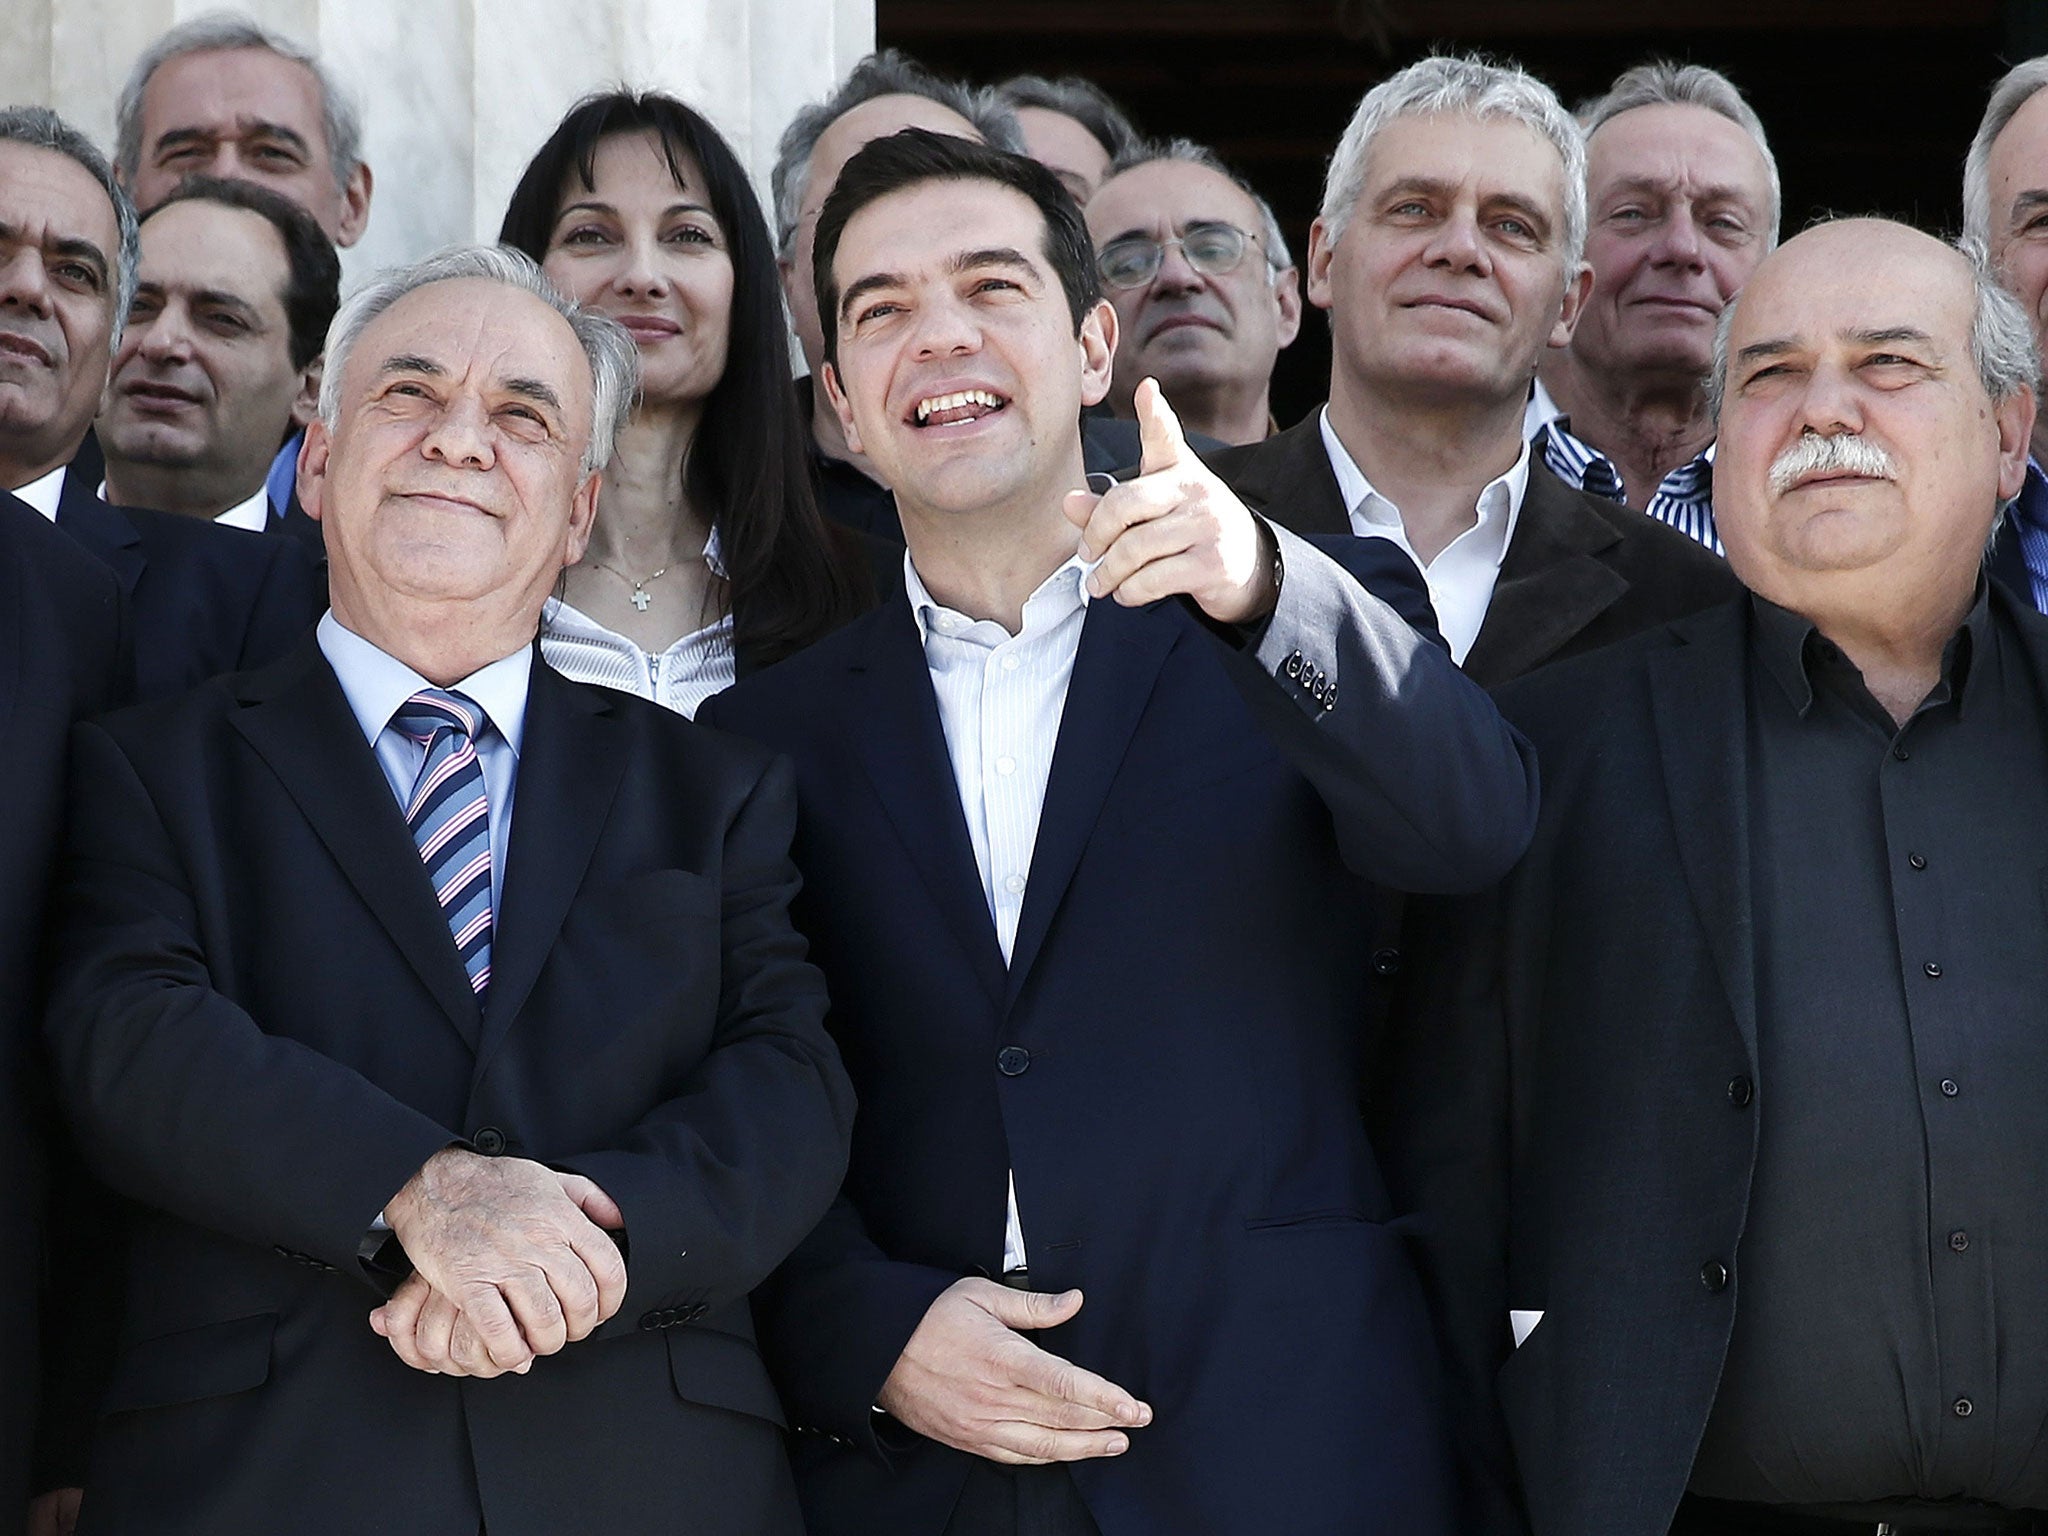 Greek Prime Minister Alexis Tsipras (centre) gestures next to Deputy Prime Minister Yannis Dragasakis (left) and Interior and Administrative Reconstruction Minister Nikos Voutsis after the first meeting of the new cabinet on January 28, 2015